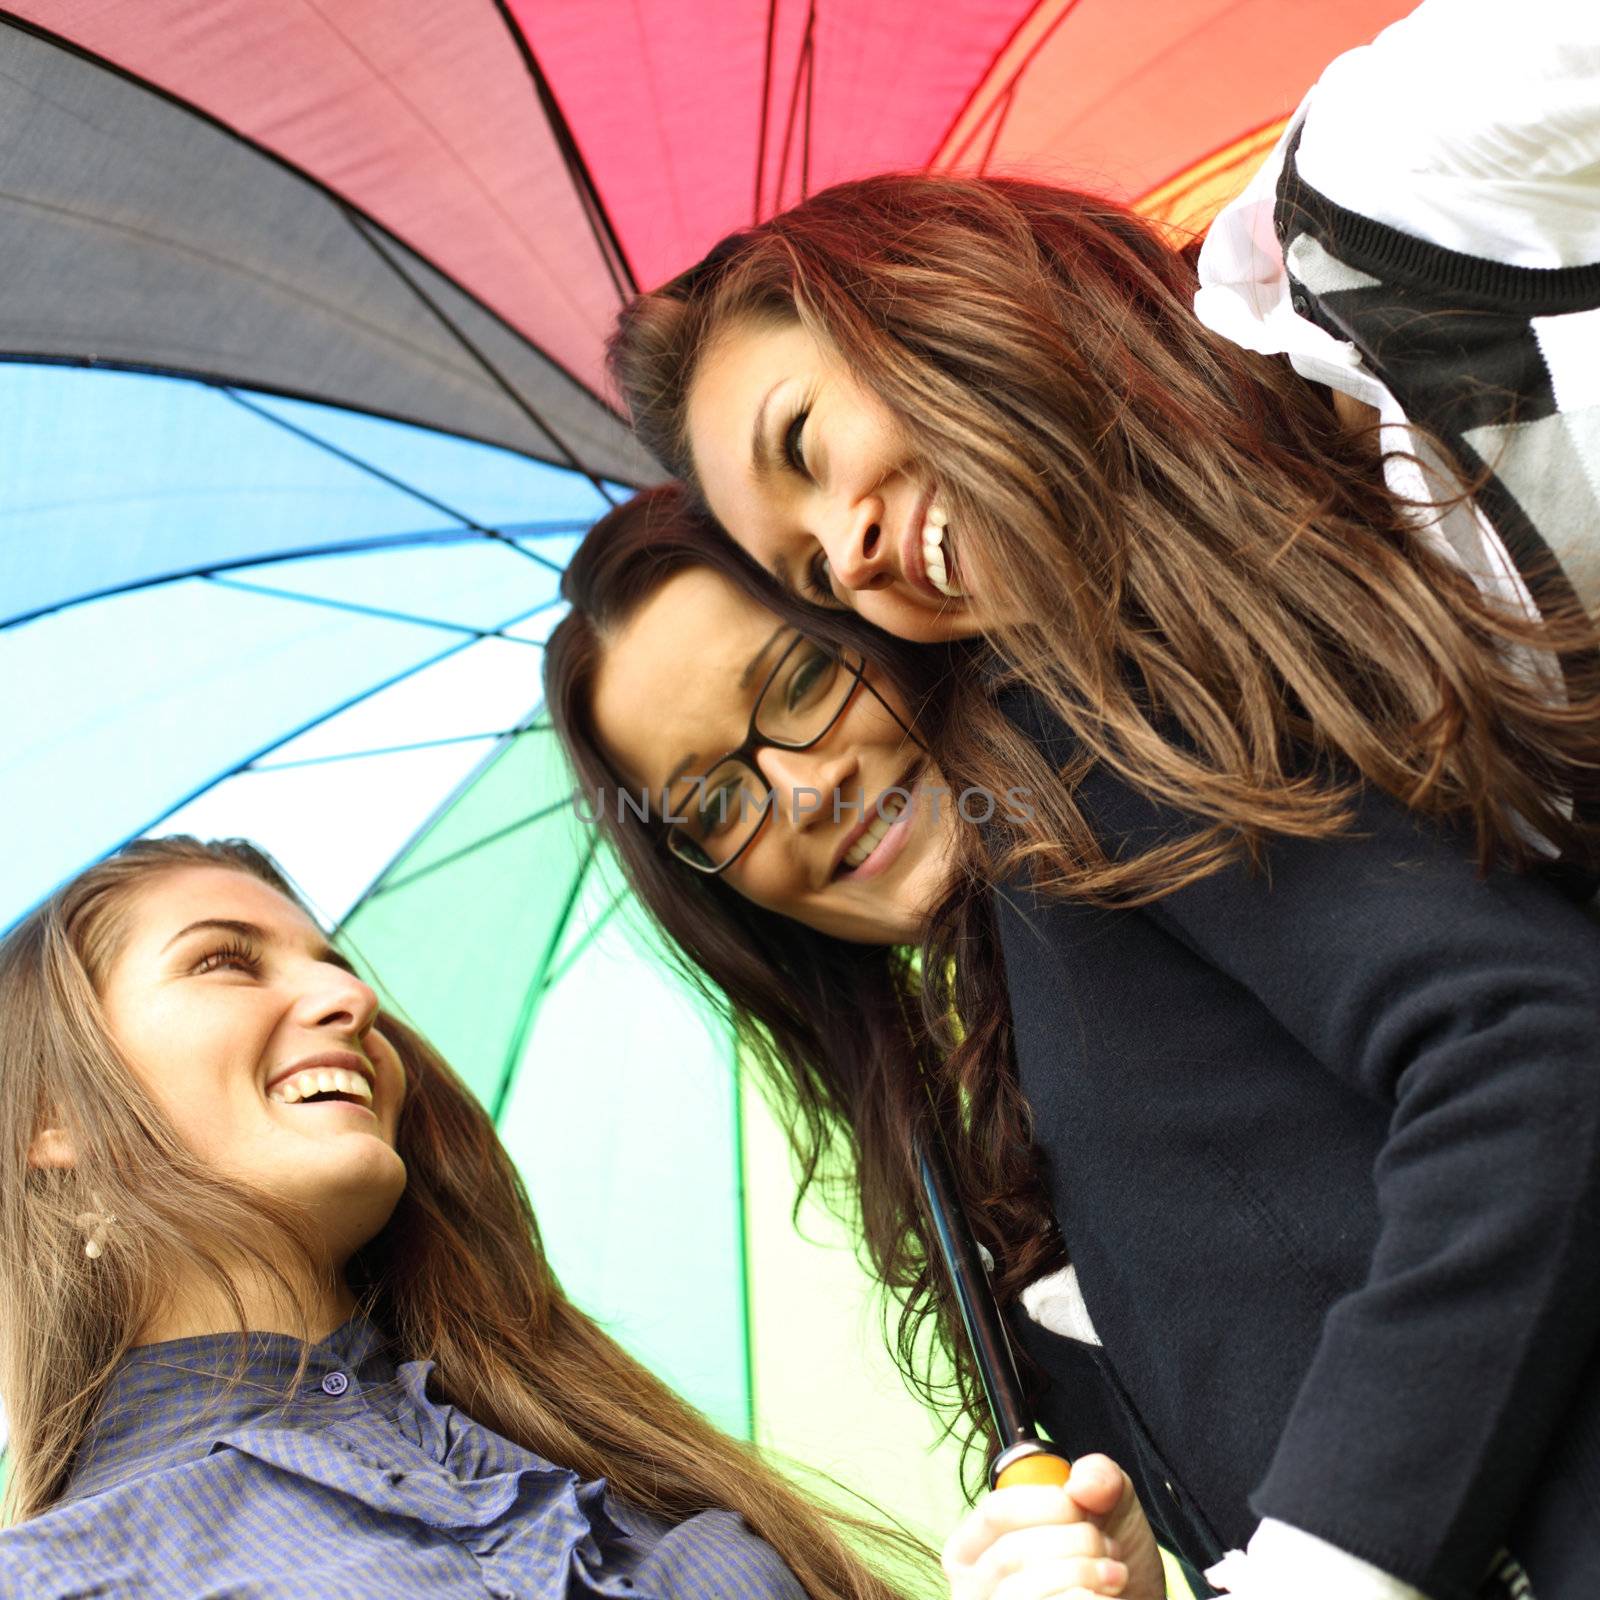 happy smiling girlfriends stay under colourful umbrella  